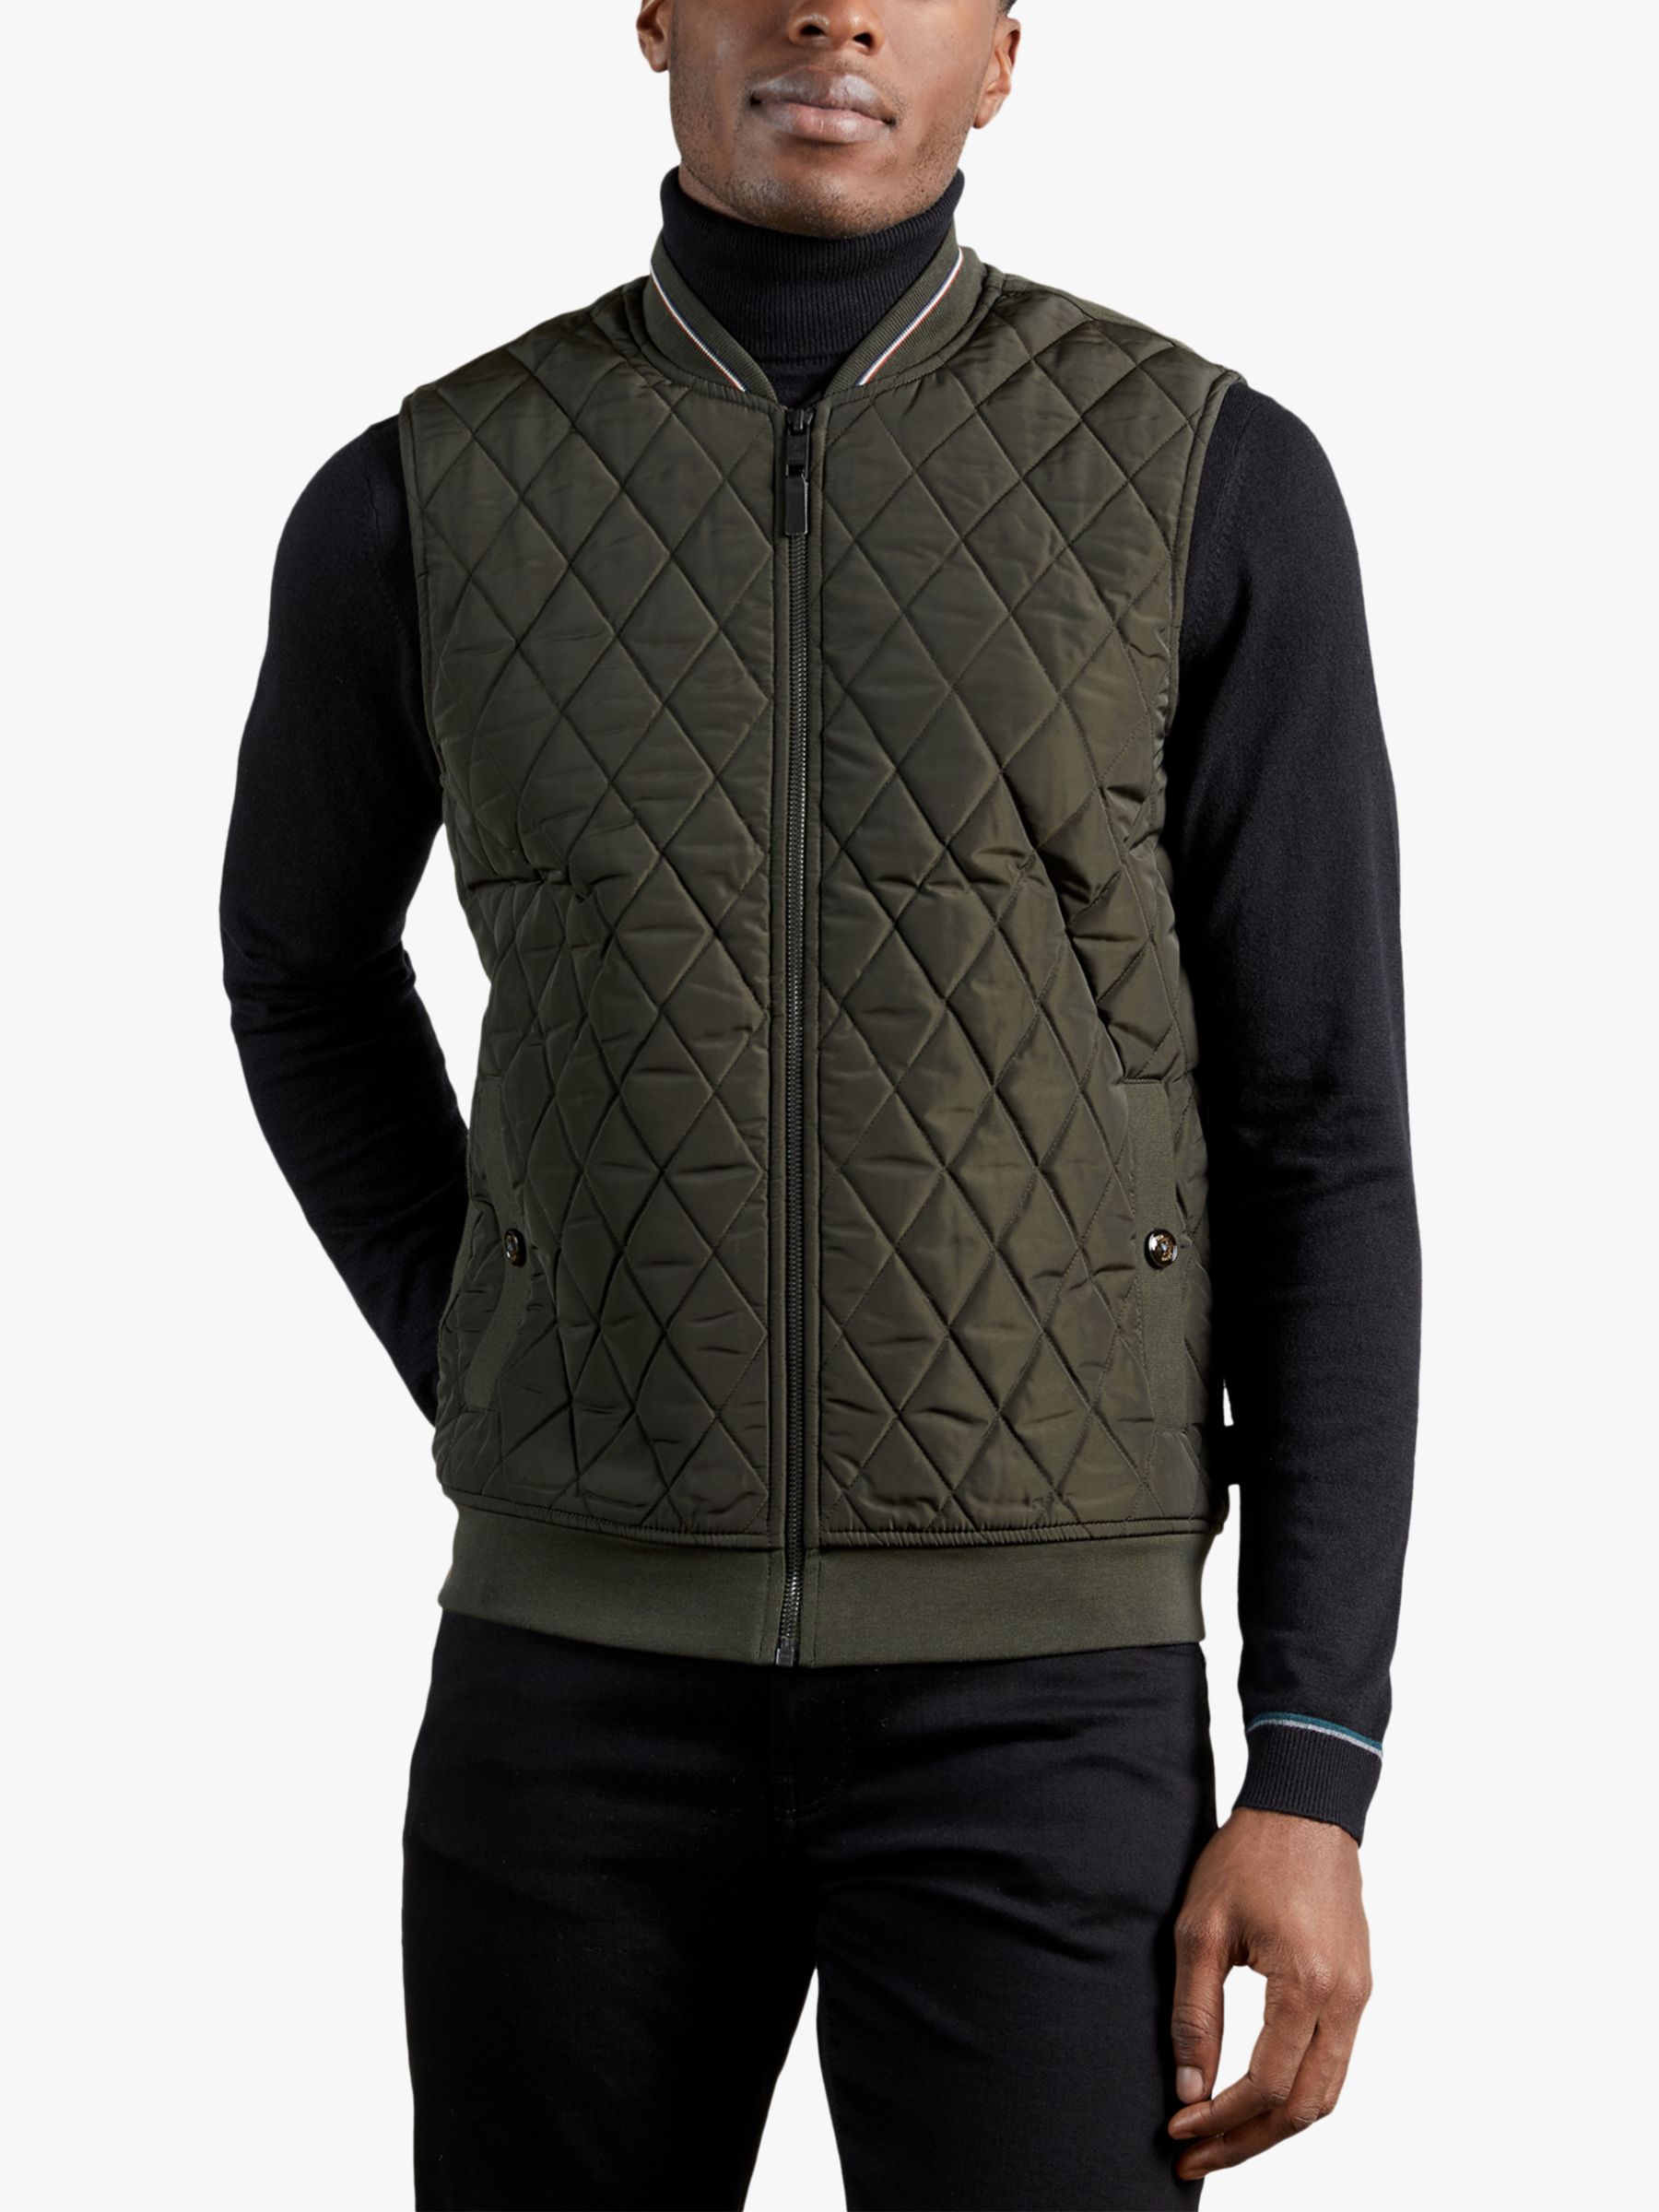 Ted Baker Britts Quilted Jersey Gilet at John Lewis & Partners